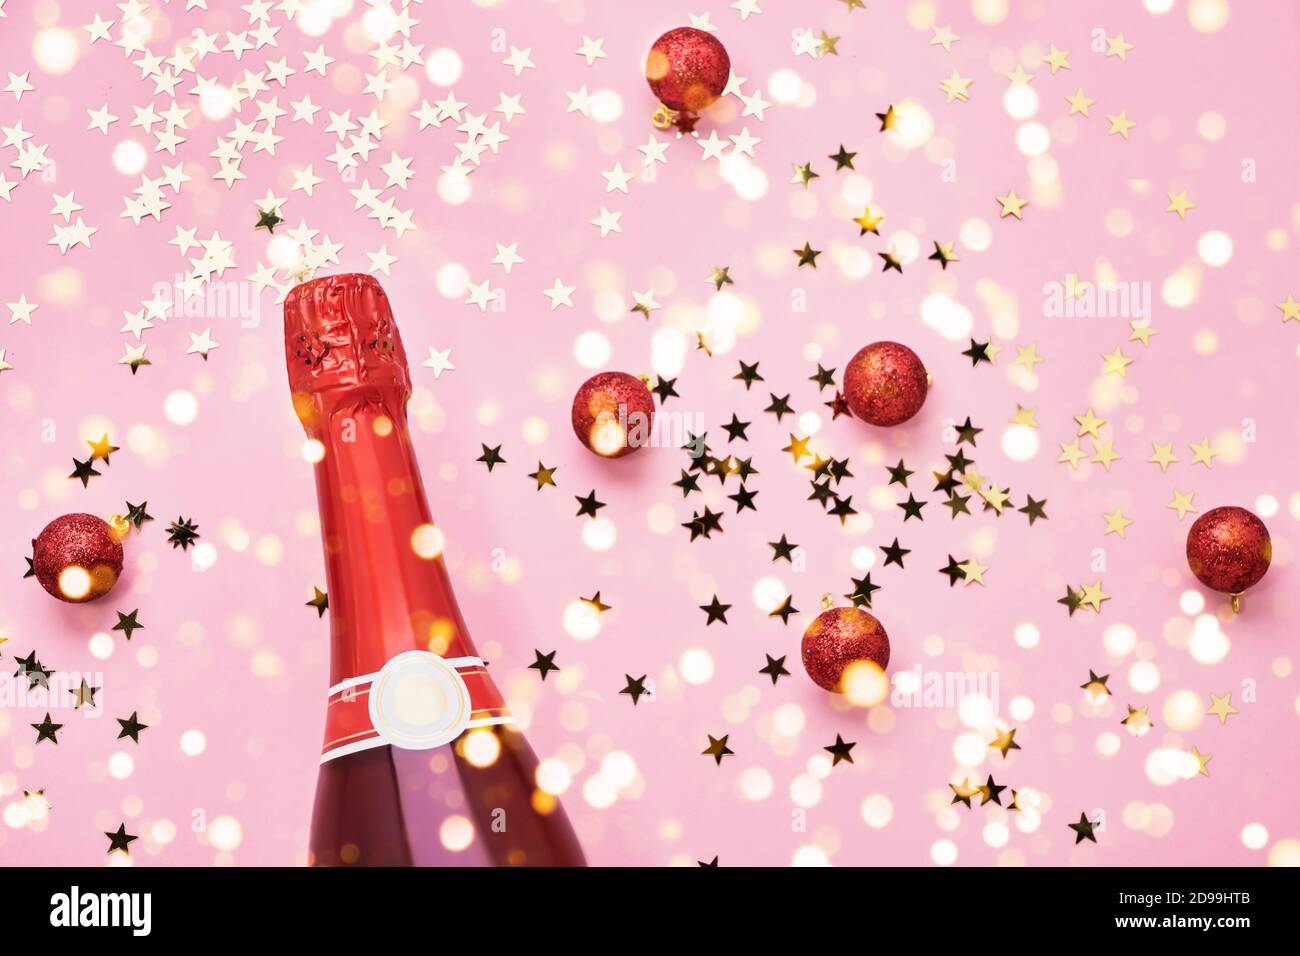 Red Champagne bottle with red Christmas decoration on pink background. Holiday background. Top view, copy space Stock Photo